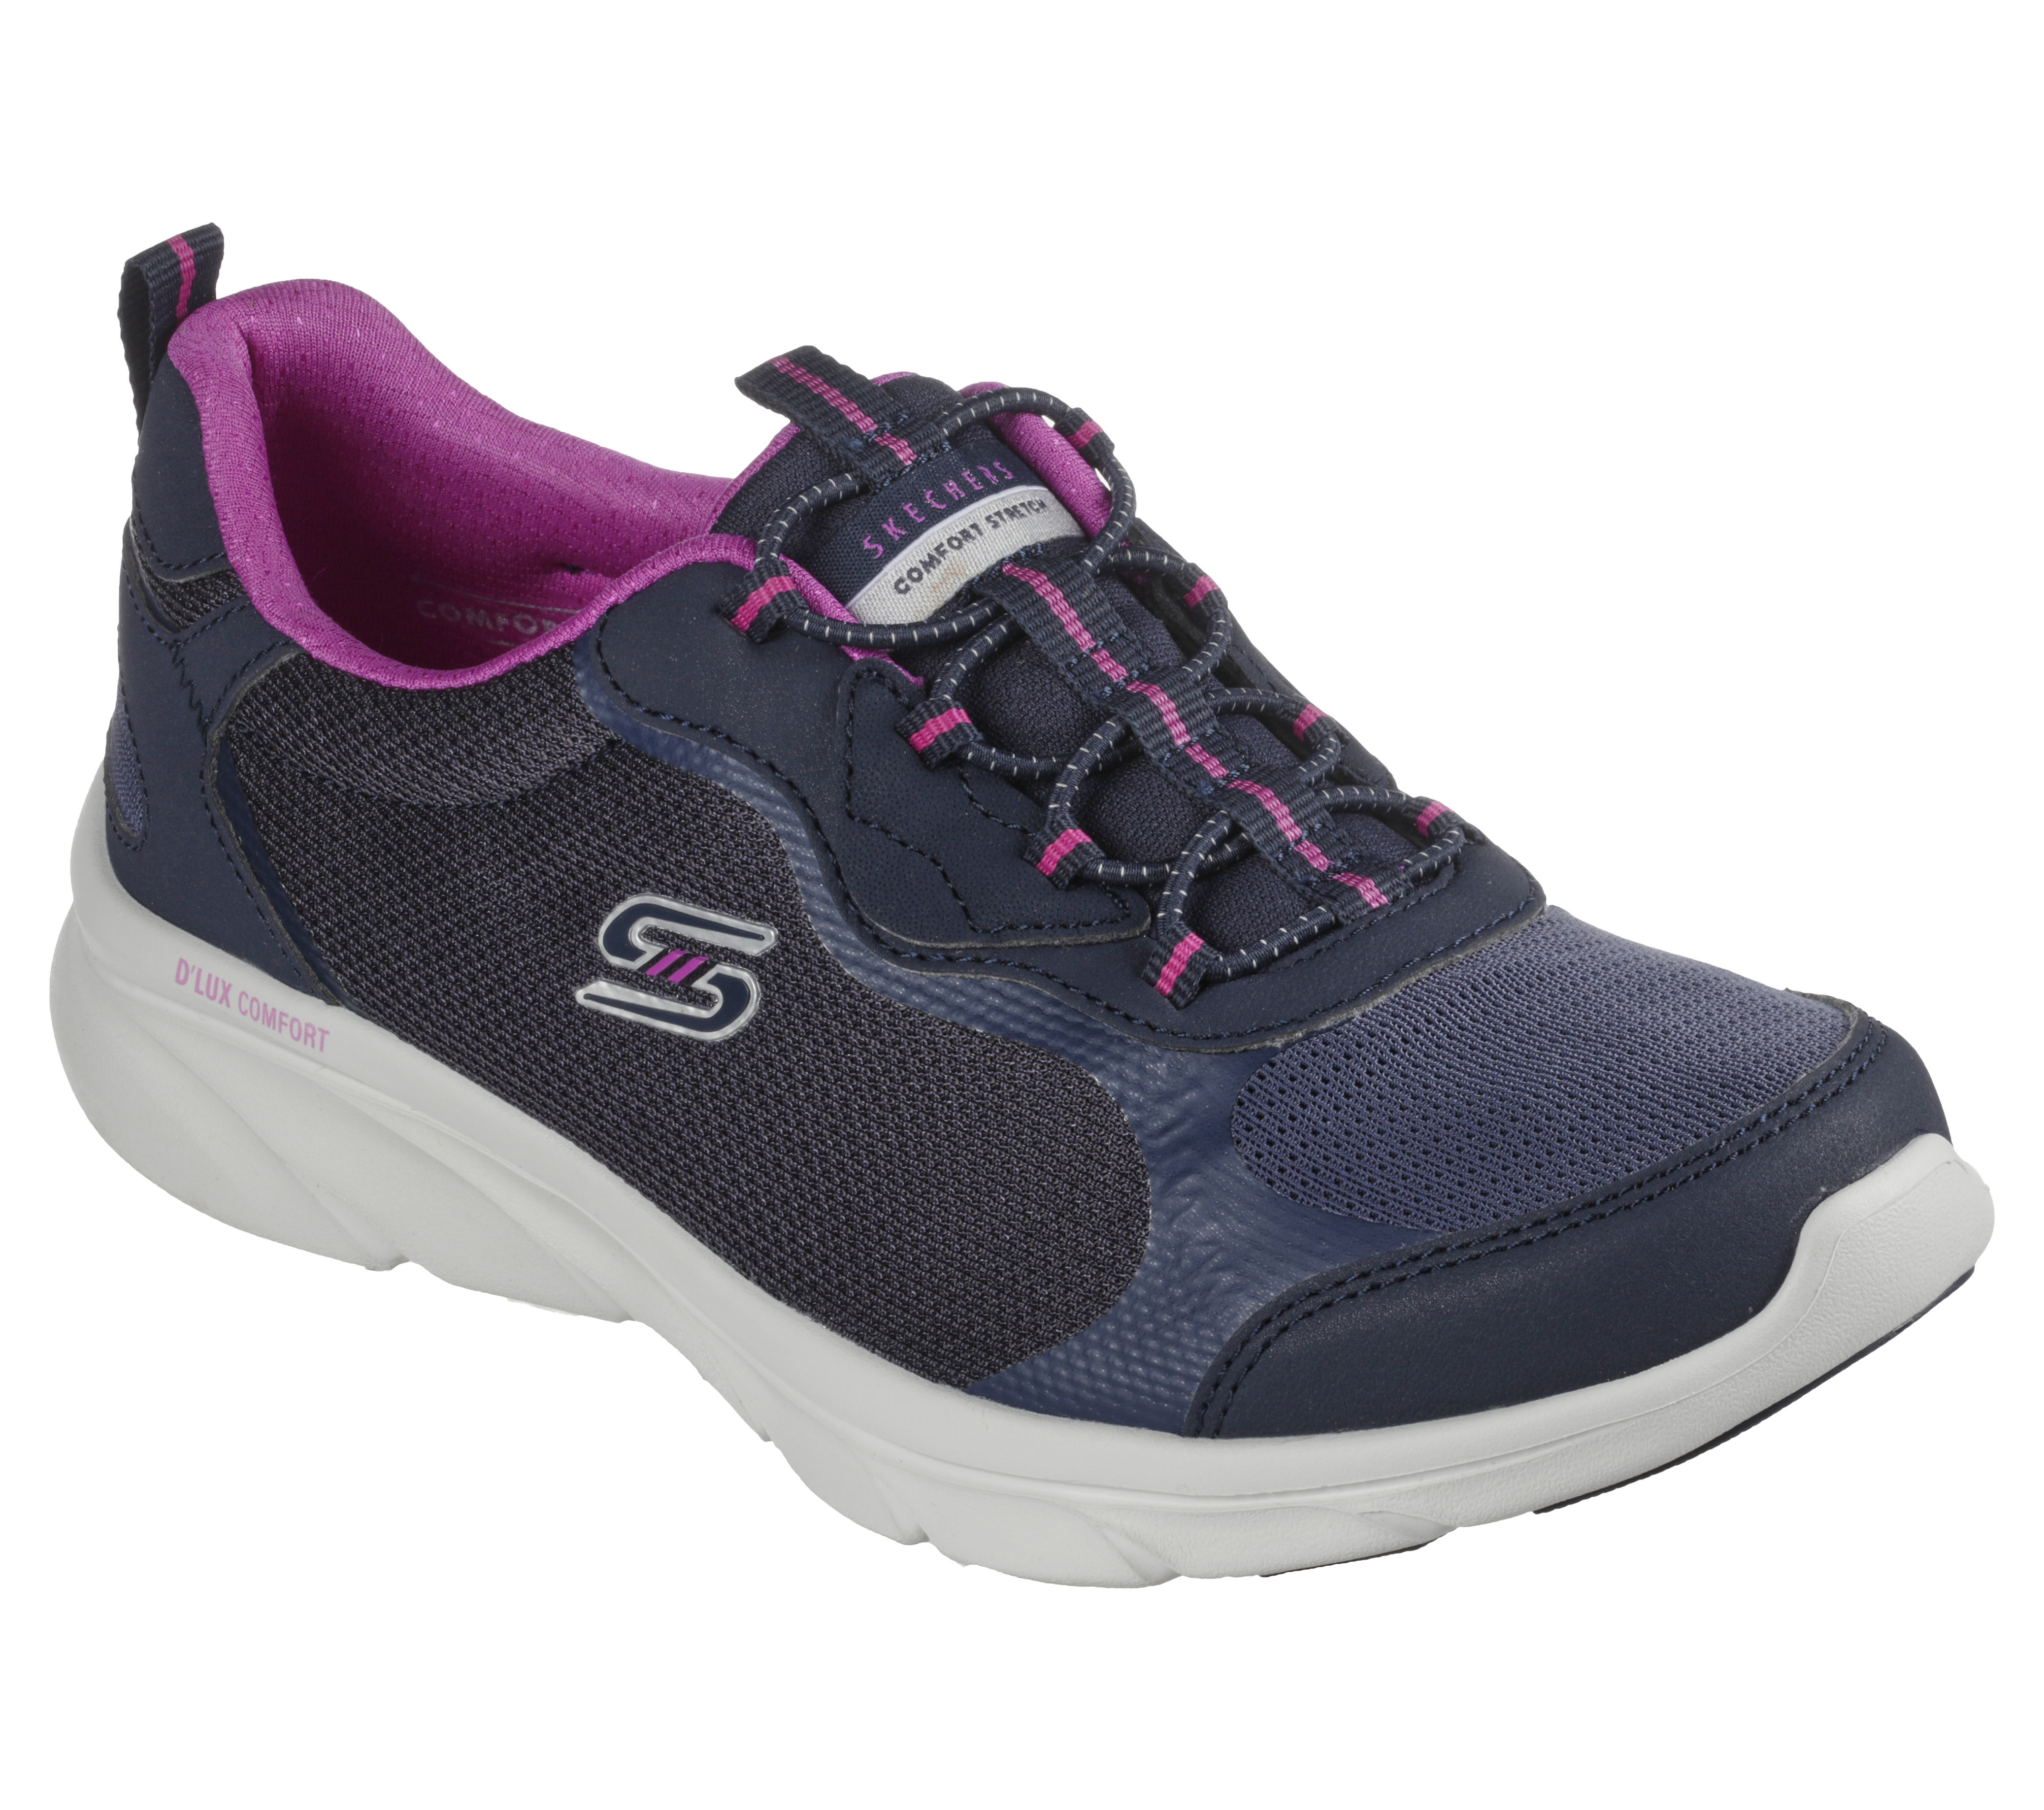 Foto de producto: Relaxed fit: d'lux comfort - bliss galore